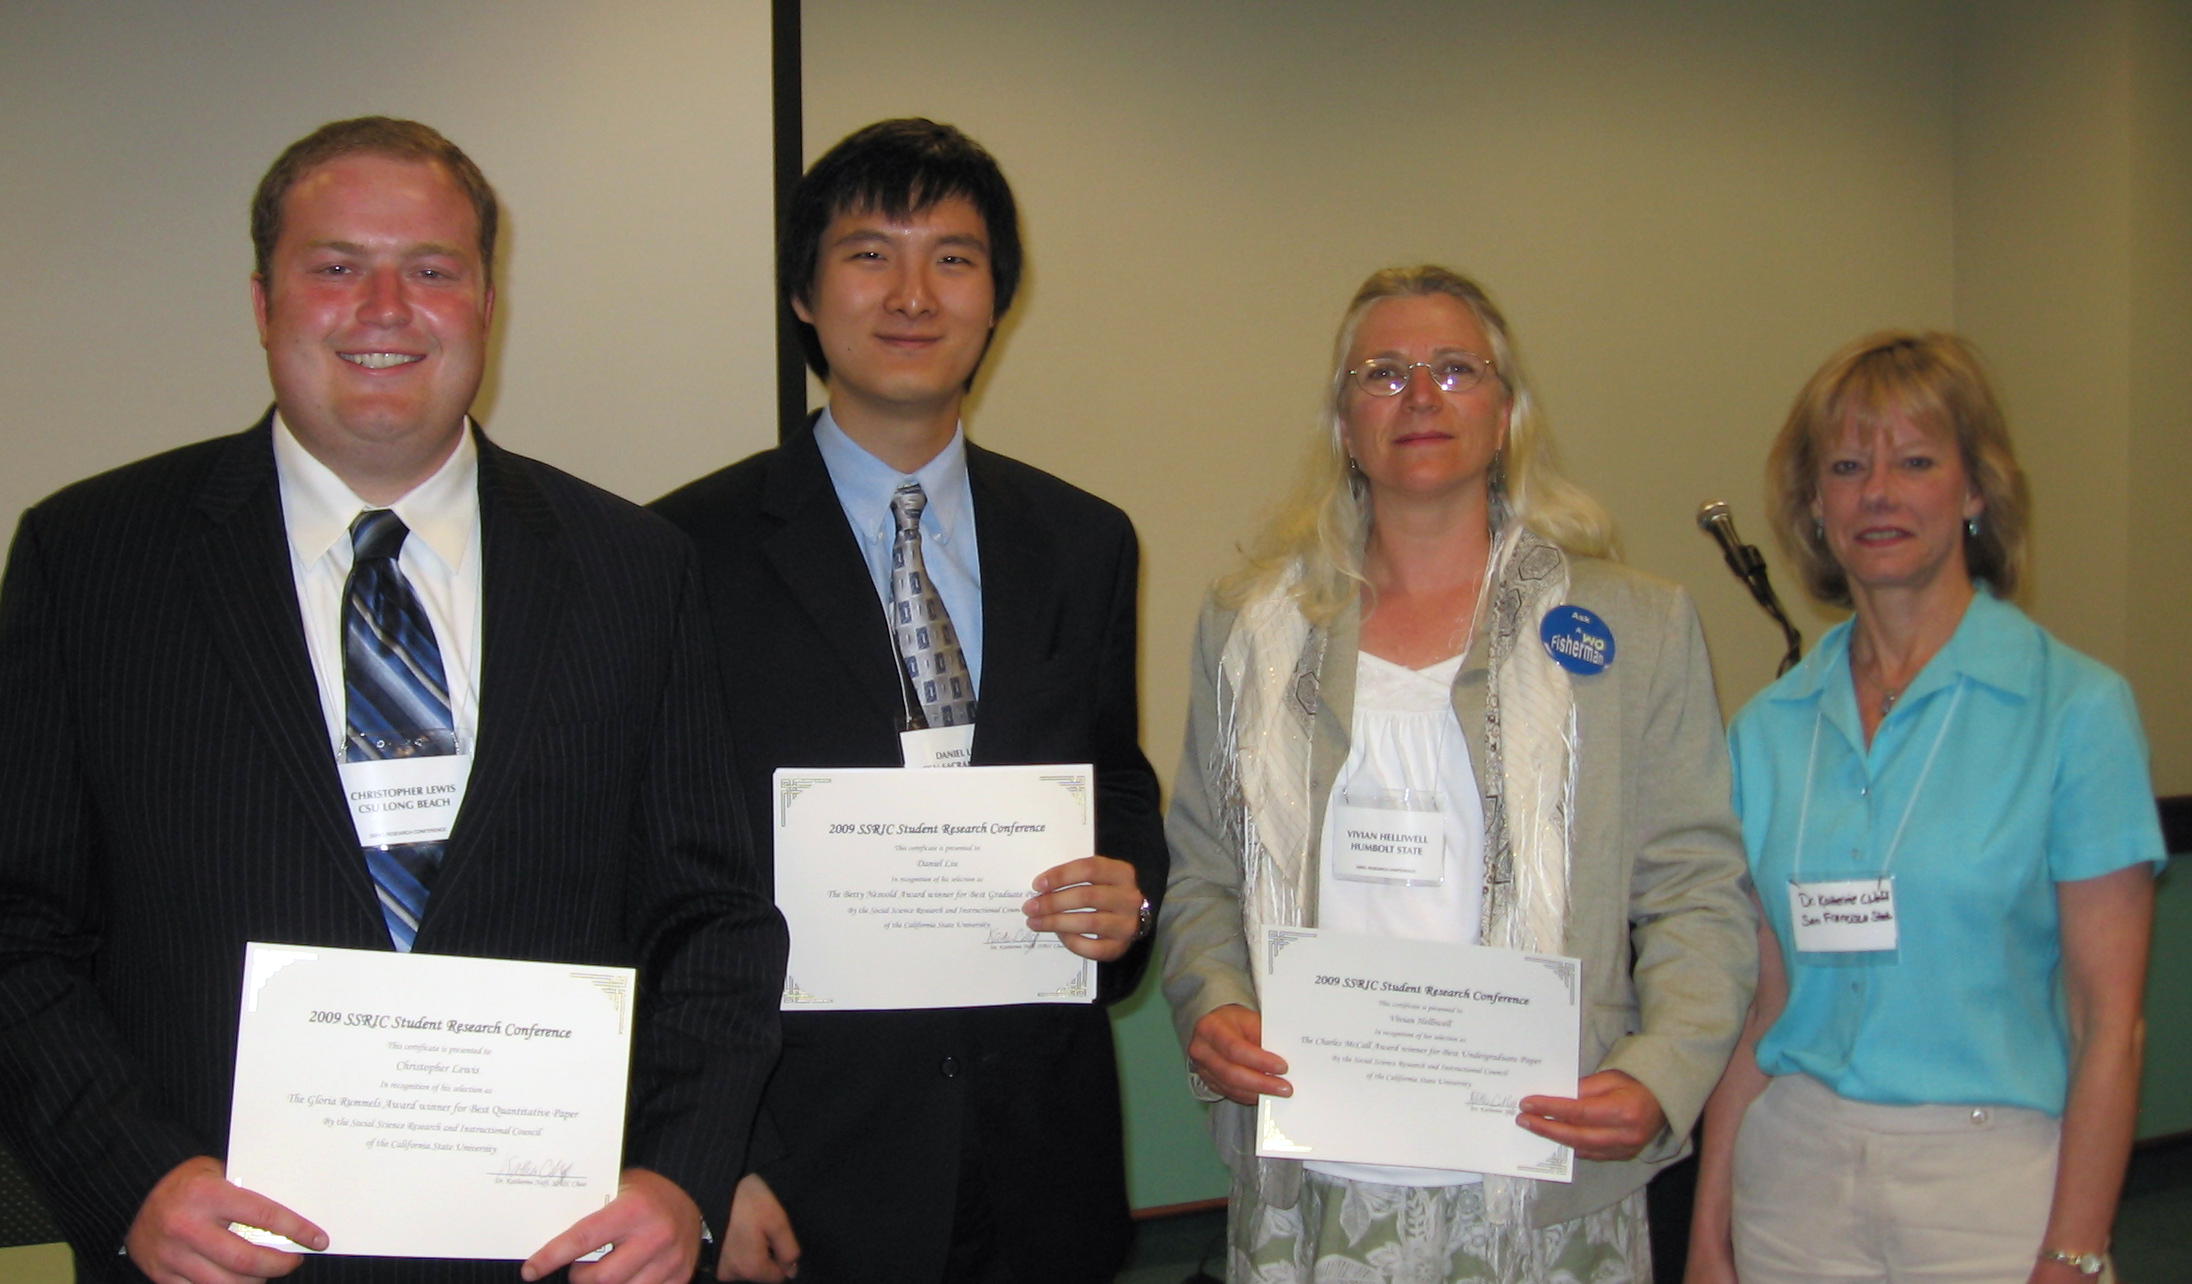 2009 Best Paper Award Winners, shown with SSRIC Chair Dr. Kathy Naff (right)